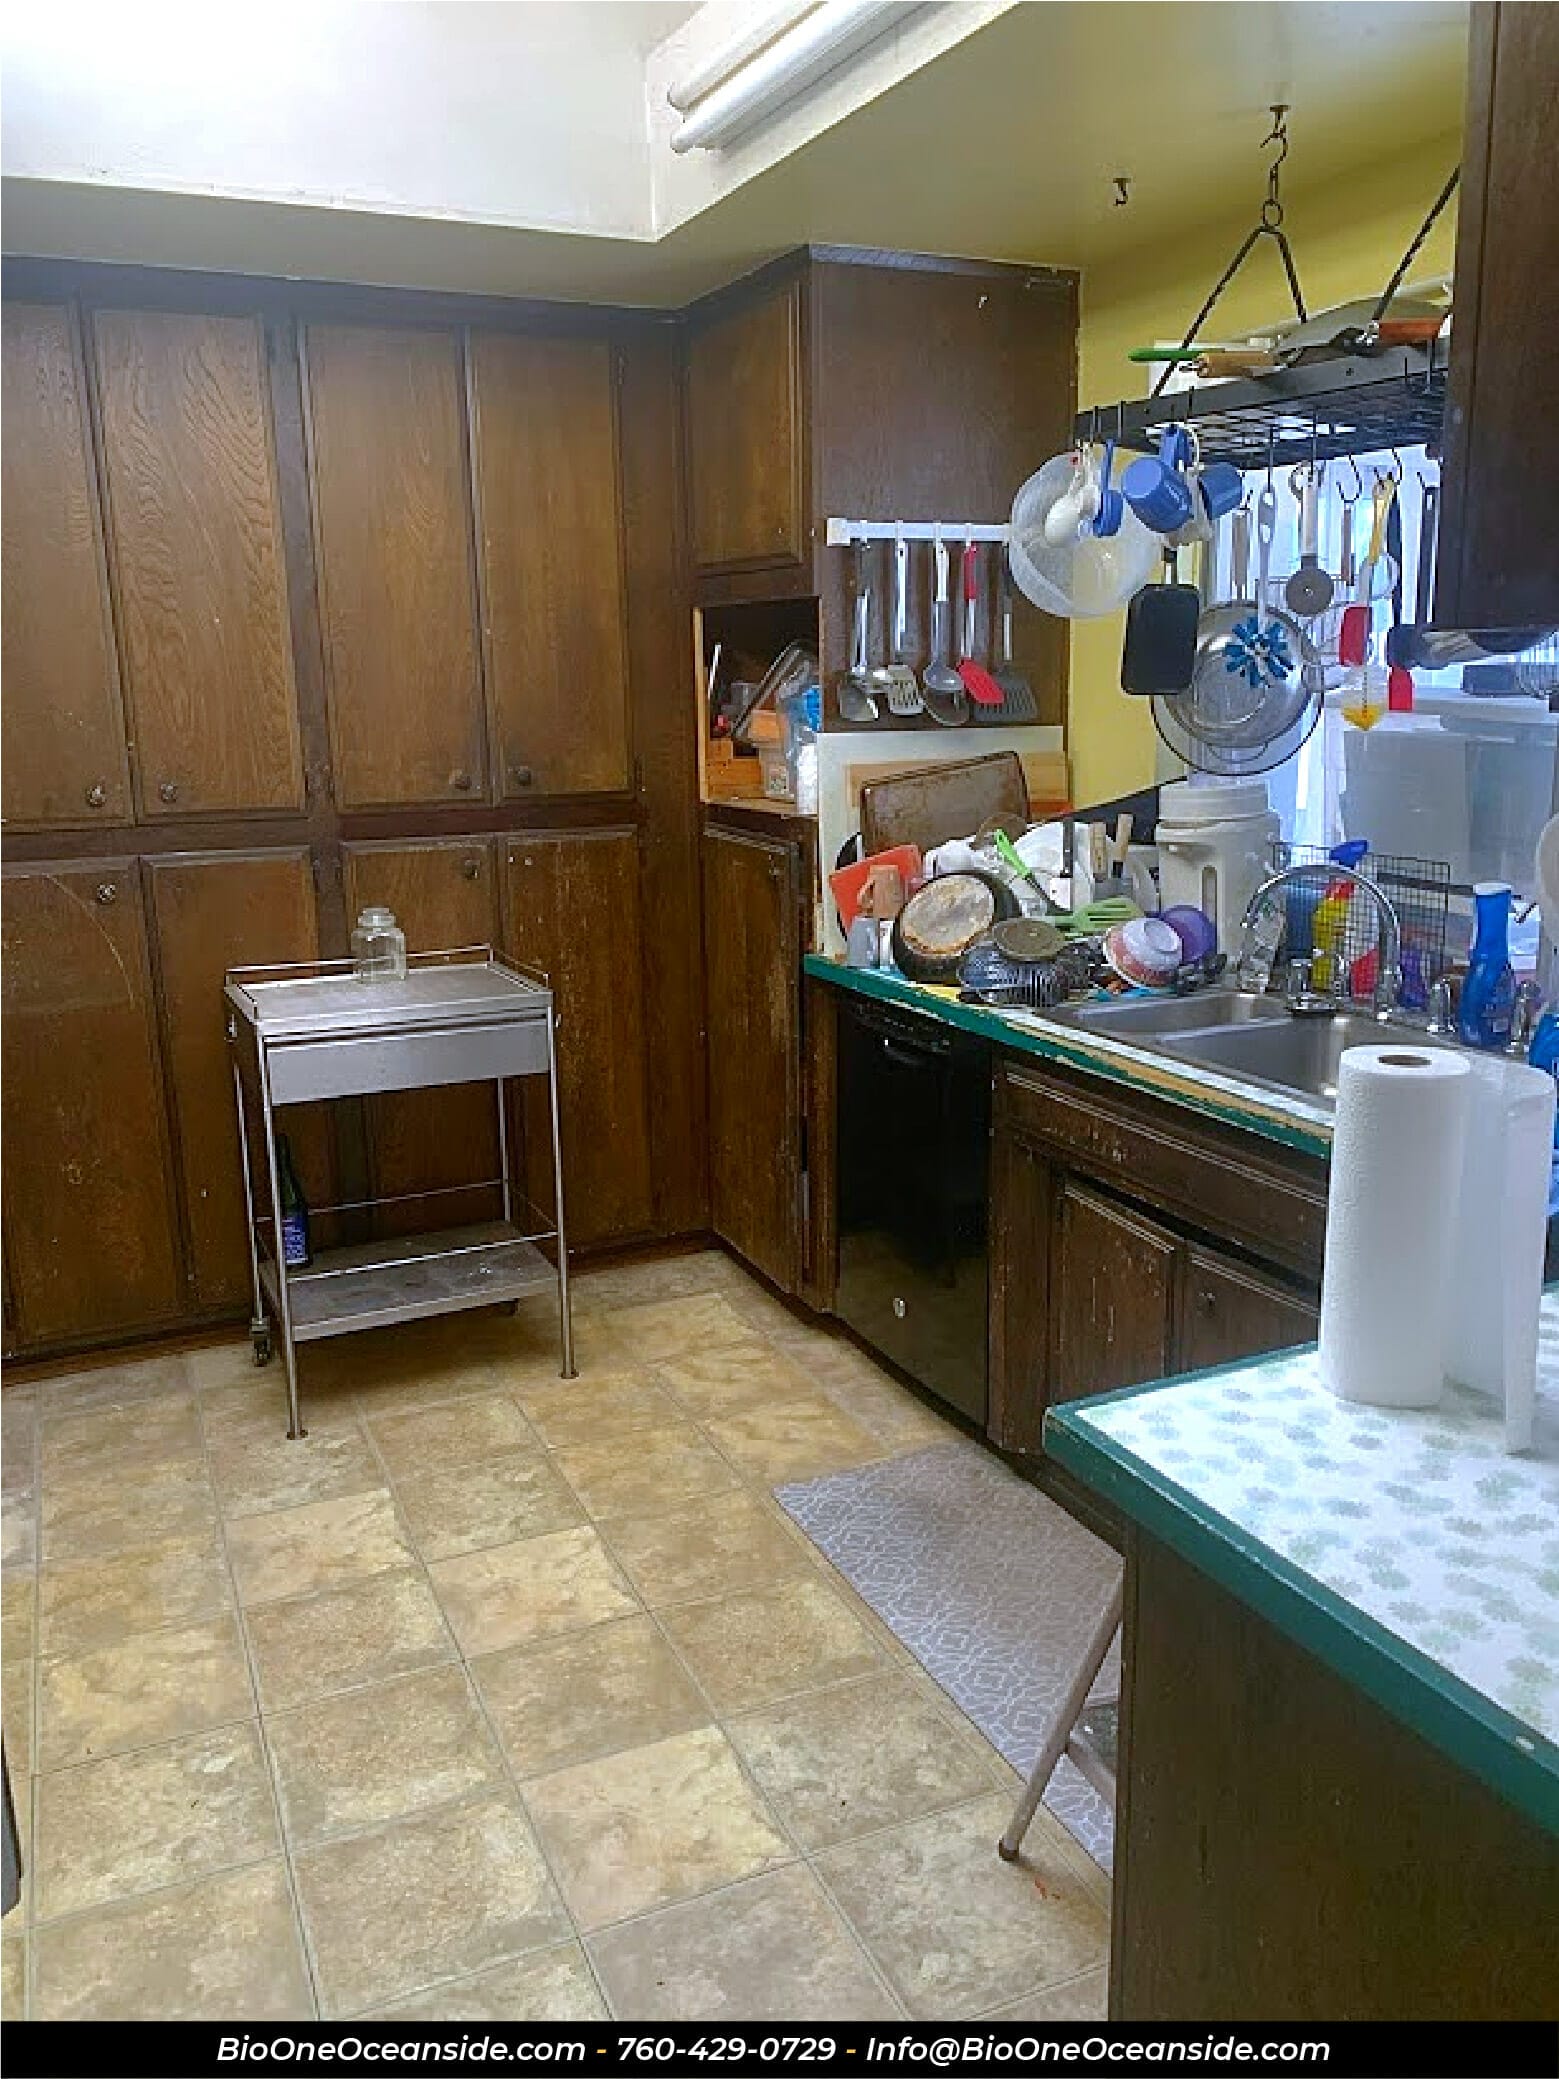 Decluttered kitchen area. Photo credit: Bio-One of Oceanside.